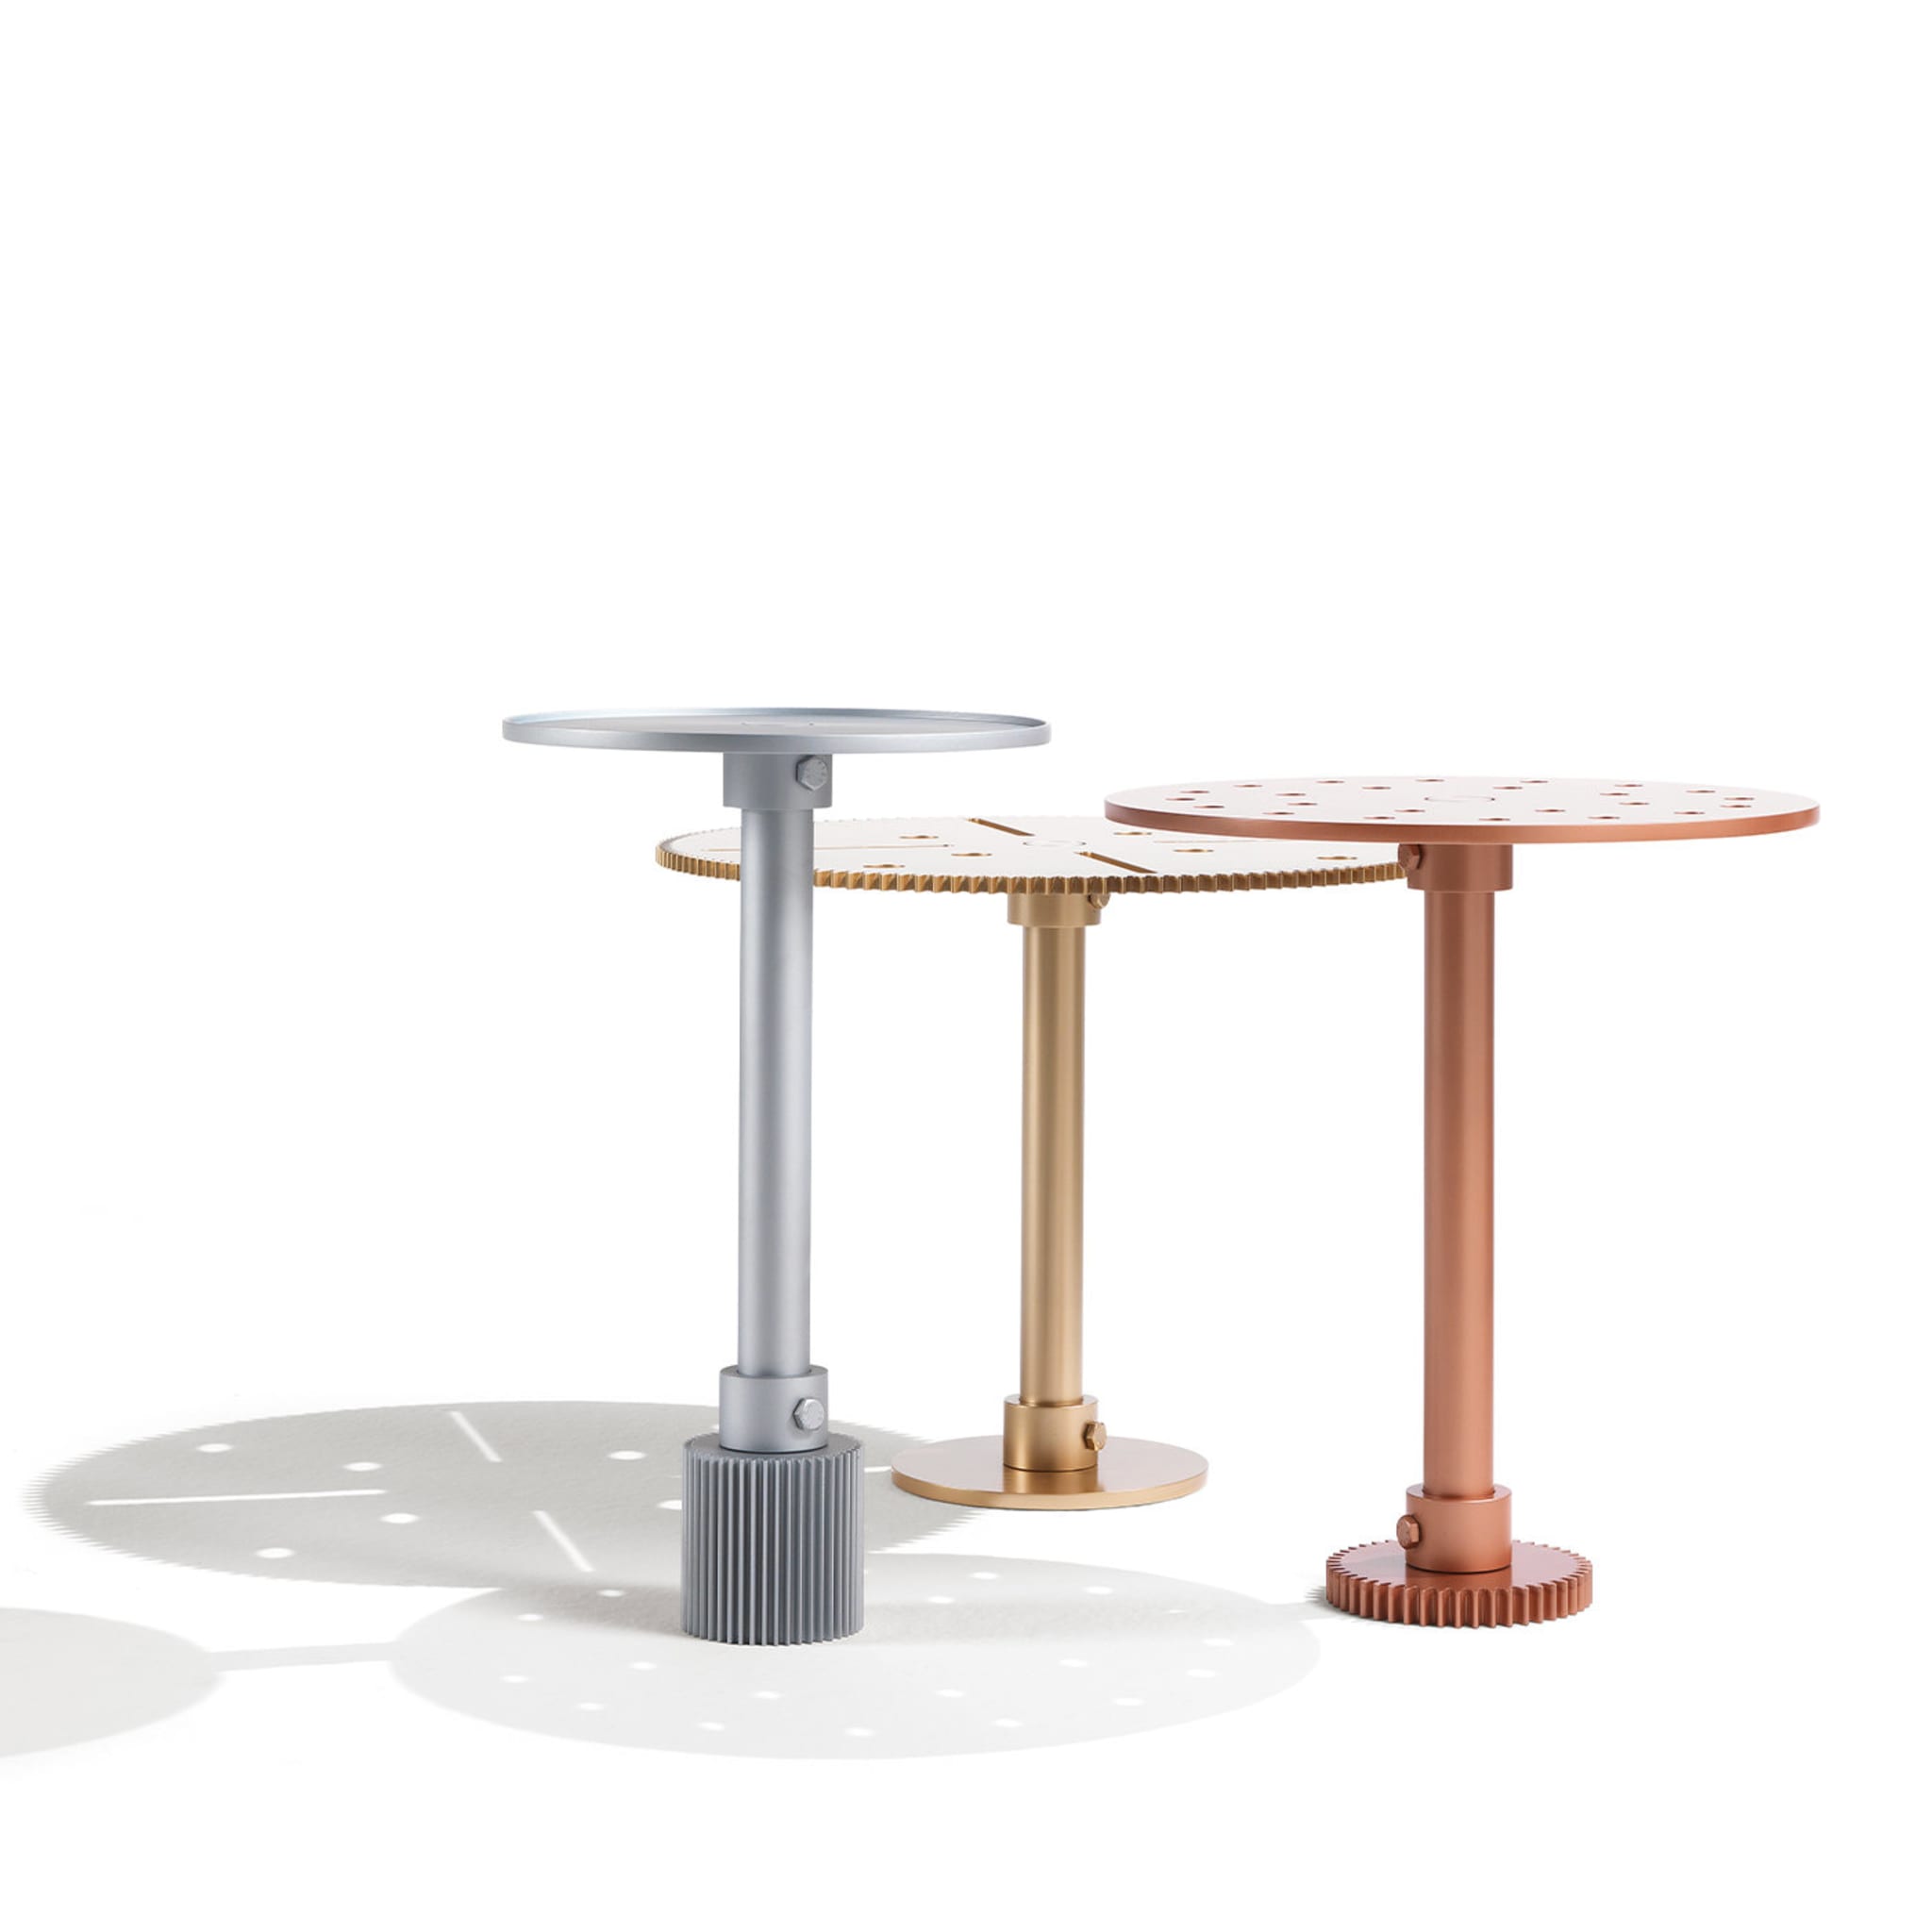 Maseen A Side Table by Samer Alameen - Alternative view 2